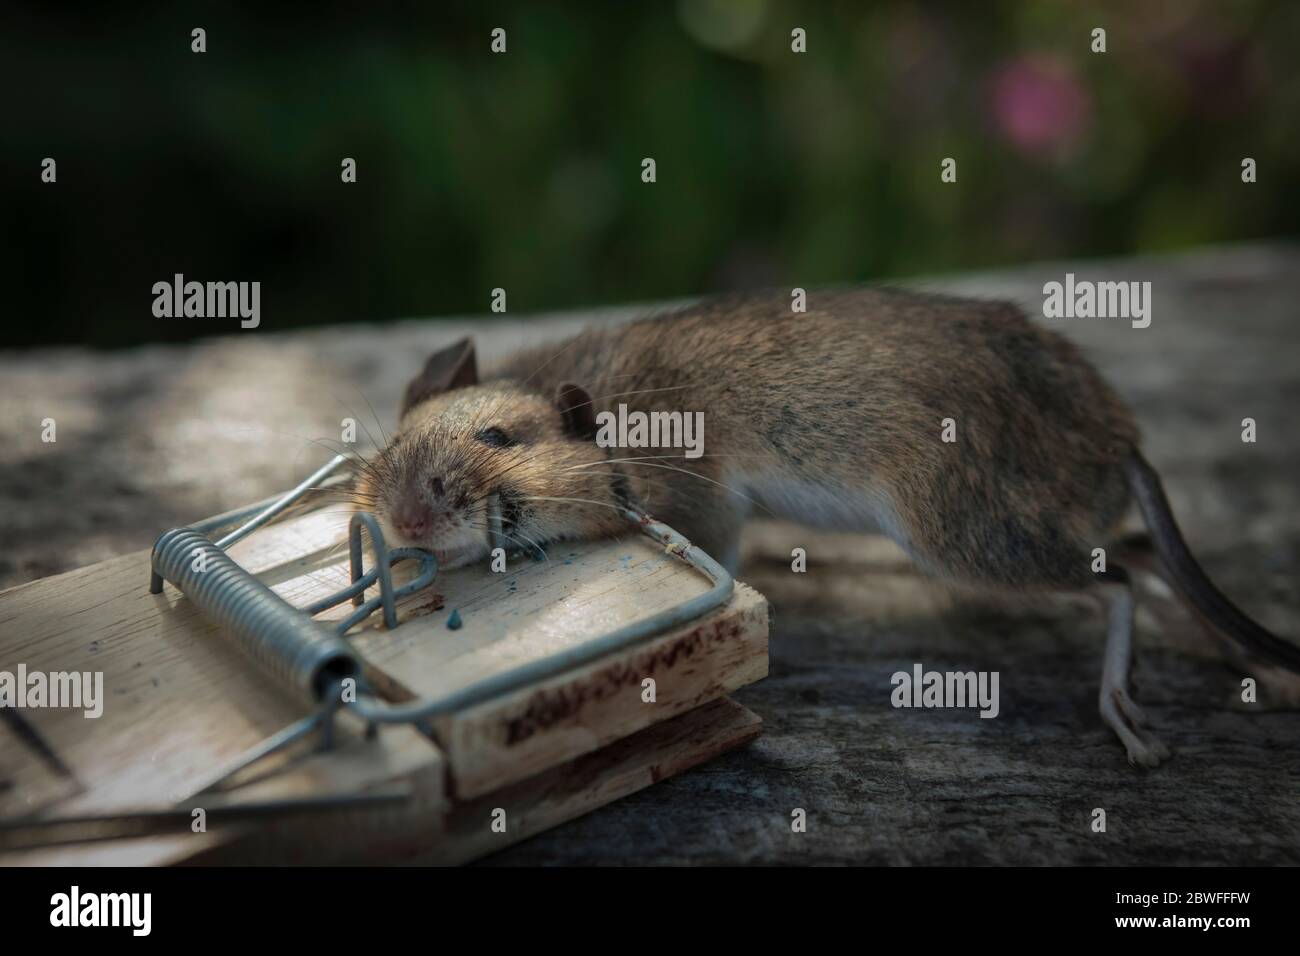 Dead mouse caught by spring trap baited with grain bait Stock Photo